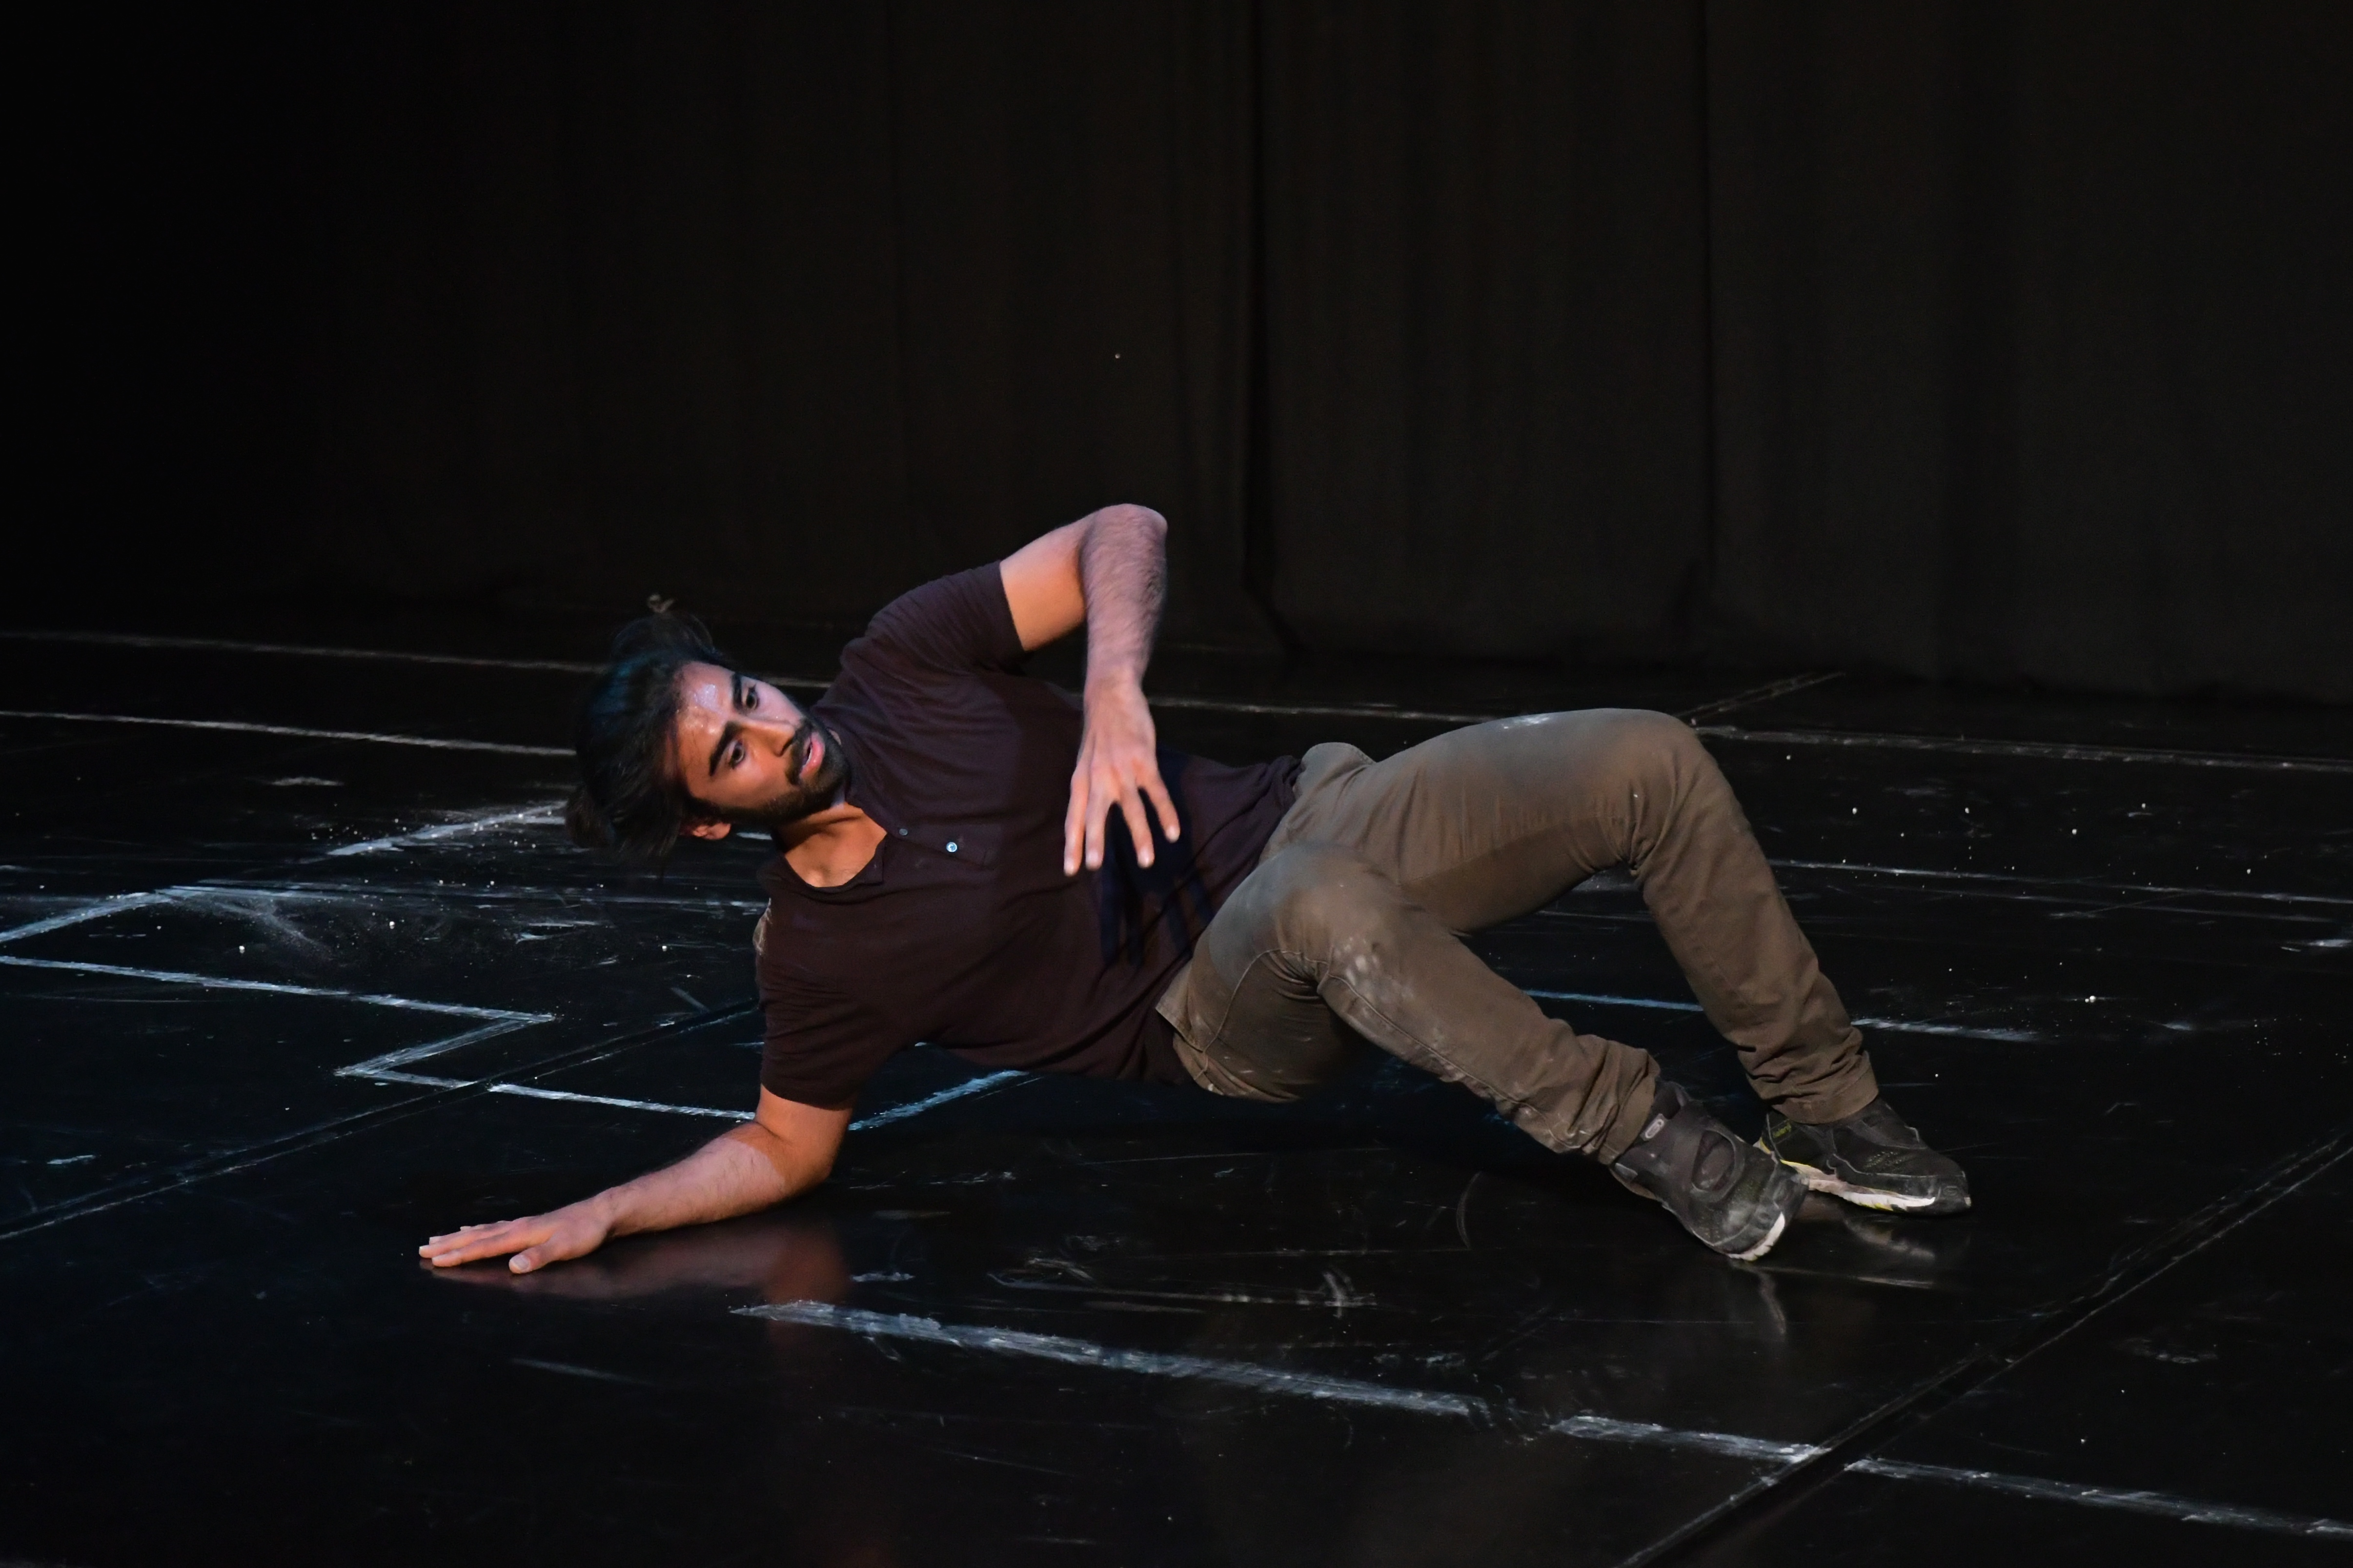 performer laying on his back. Black stage and black background